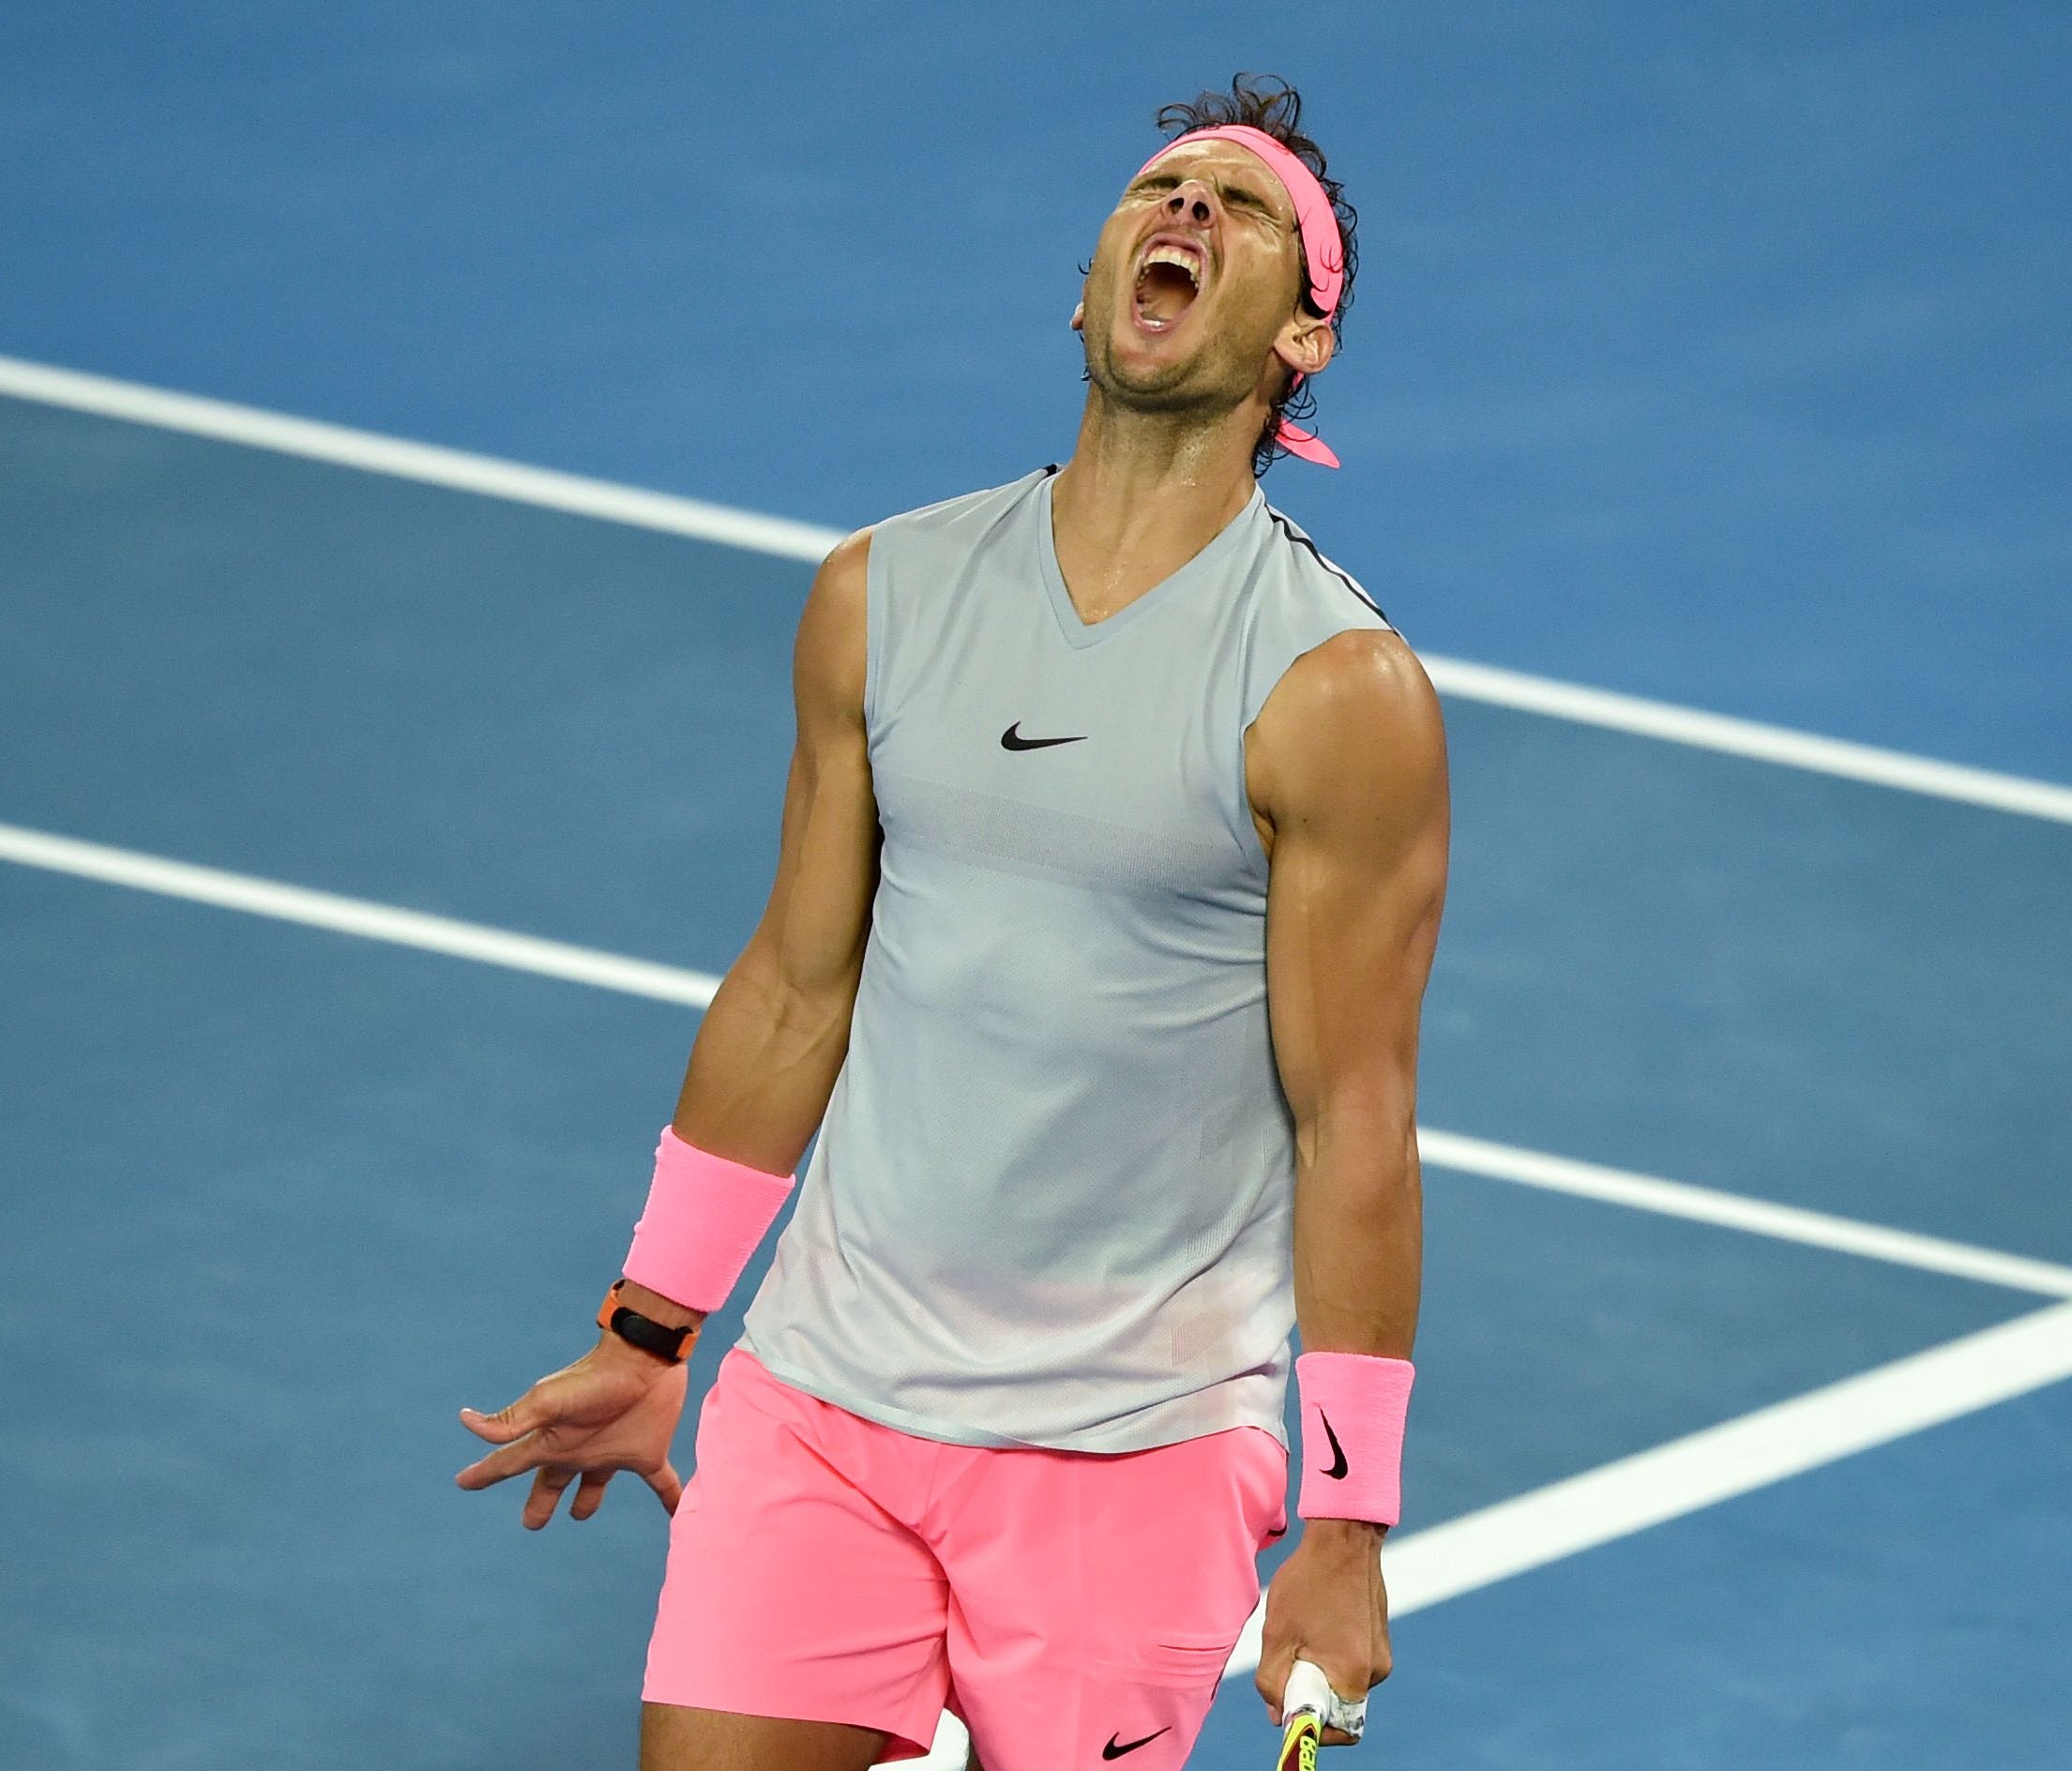 Spain's Rafael Nadal reacts against Croatia's Marin Cilic during their men's singles quarter-finals match on day nine of the Australian Open tennis tournament in Melbourne on Jan. 23.